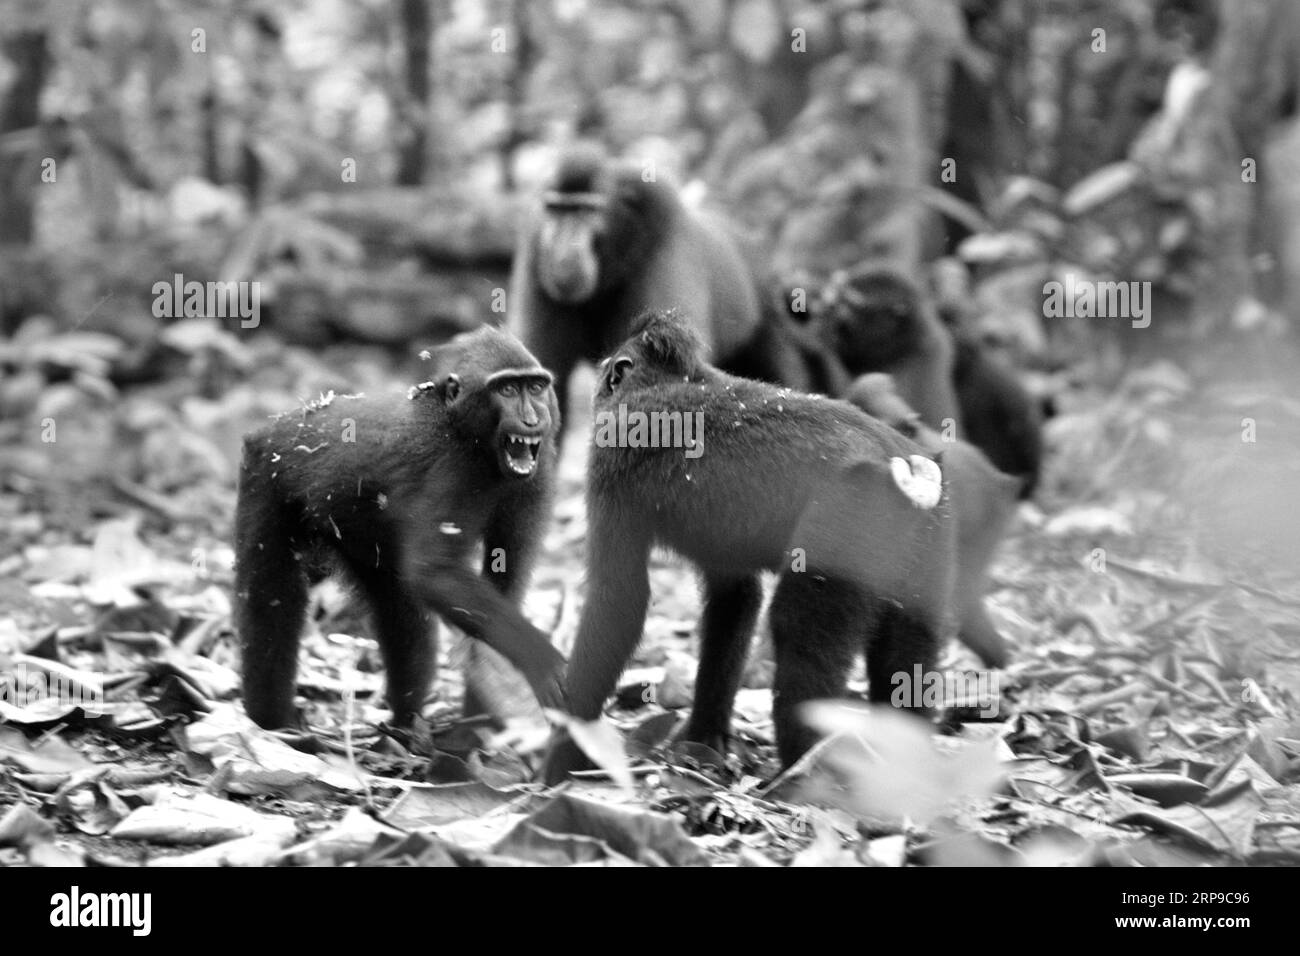 Aggressive behaviors between young Sulawesi crested macaques (Macaca nigra) are photographed in Tangkoko forest, North Sulawesi, Indonesia. Primate scientists have found that fighting or chasing each others are part of crested macaque's social activities. Aggressive manual contacts occurred frequently and are very normal, and are often followed by retaliation and reconciliation--a fact that has helped building the reputation of crested macaque as a highly socially tolerant species. Meanwhile, climate change may reduce the habitat suitability of primate species, that could force them to move... Stock Photo